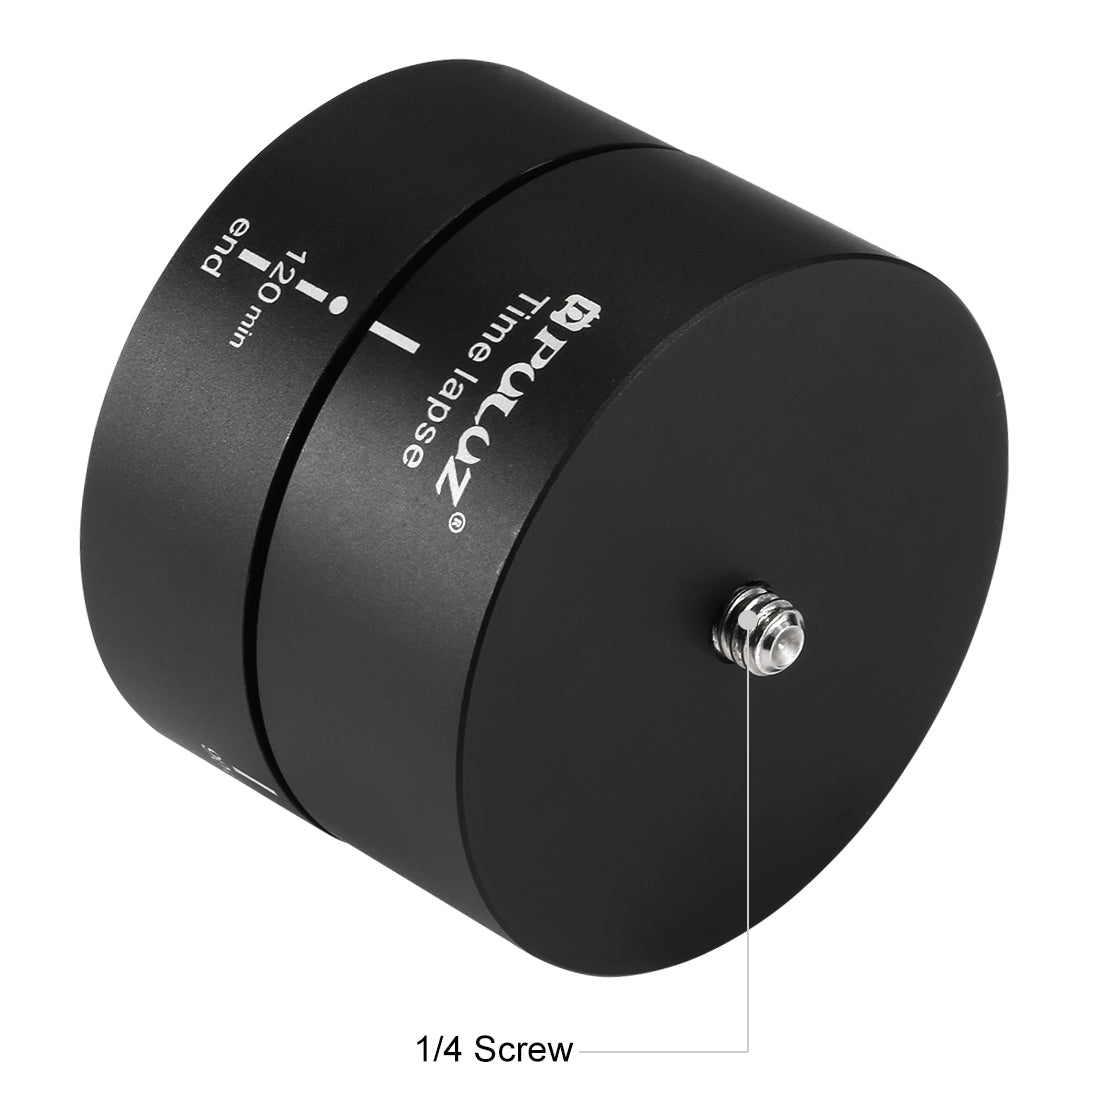 360 Degrees Panning Rotation 120 Minutes Time Lapse Stabilizer Tripod Head Adapter